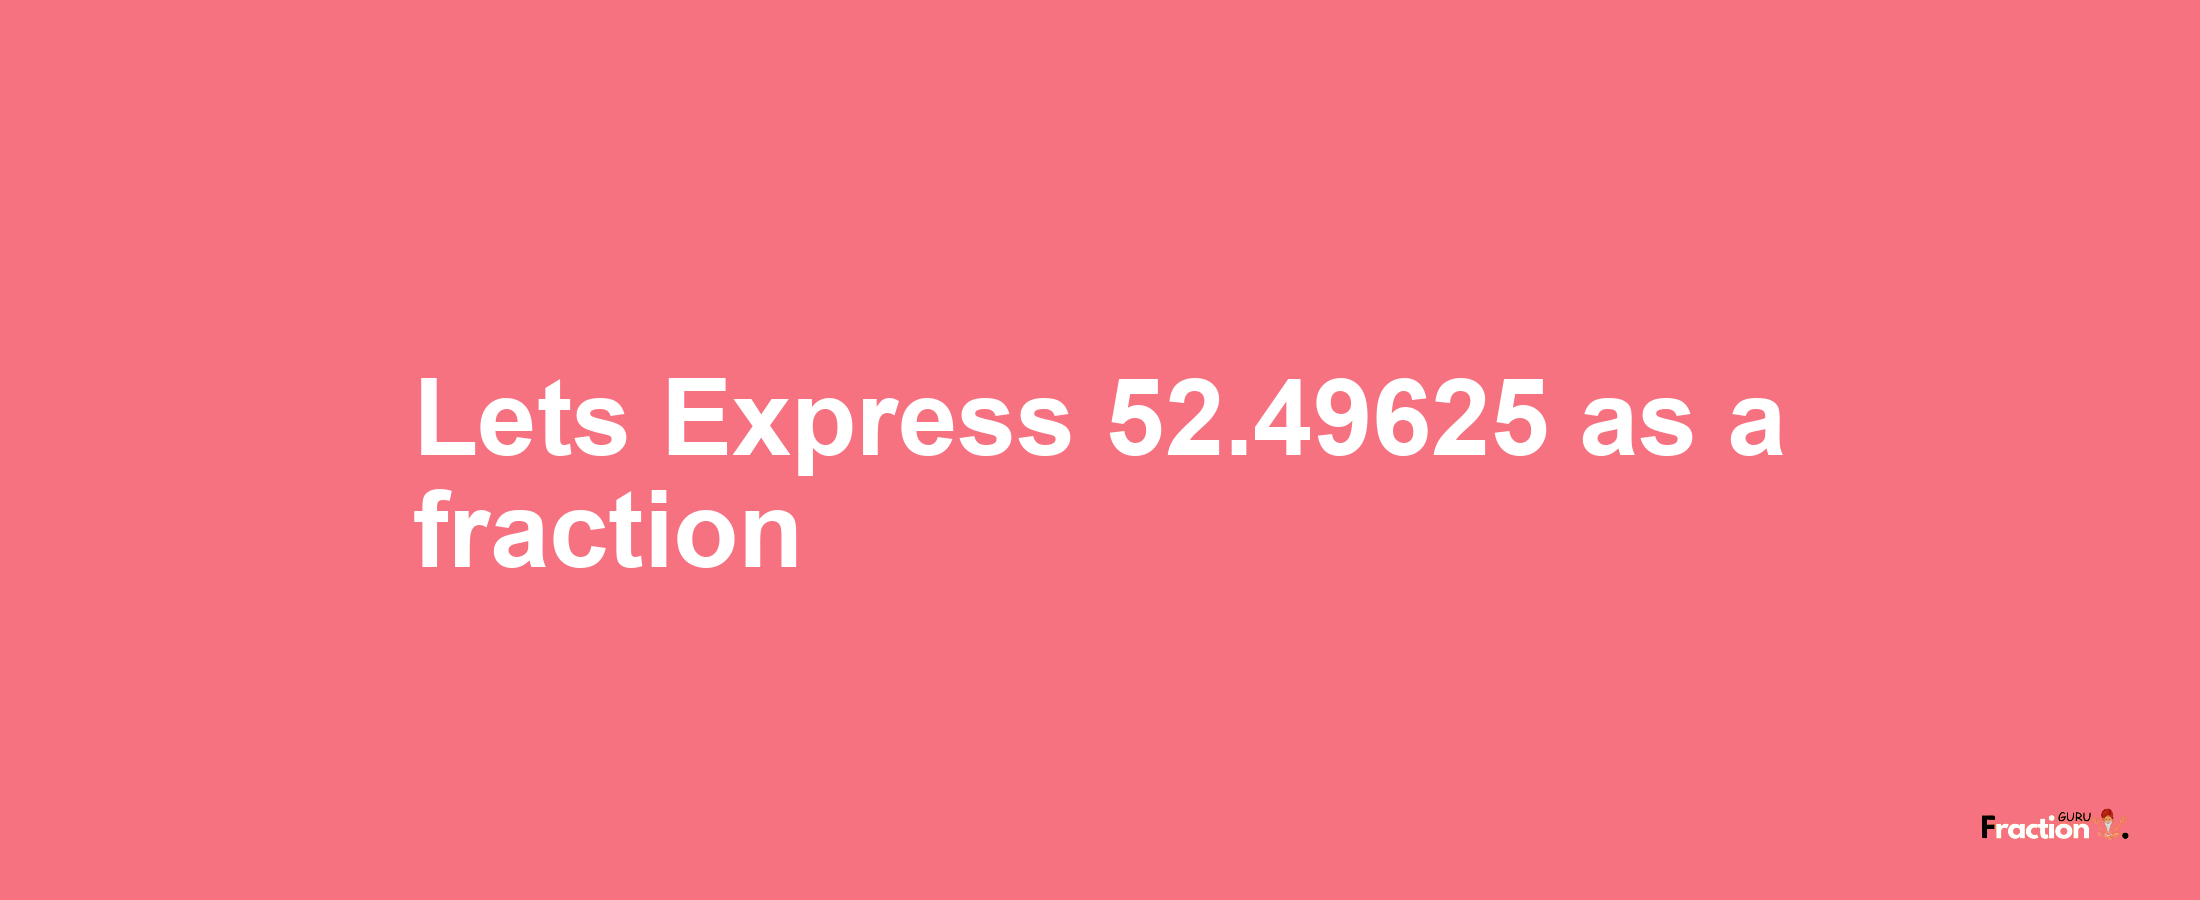 Lets Express 52.49625 as afraction